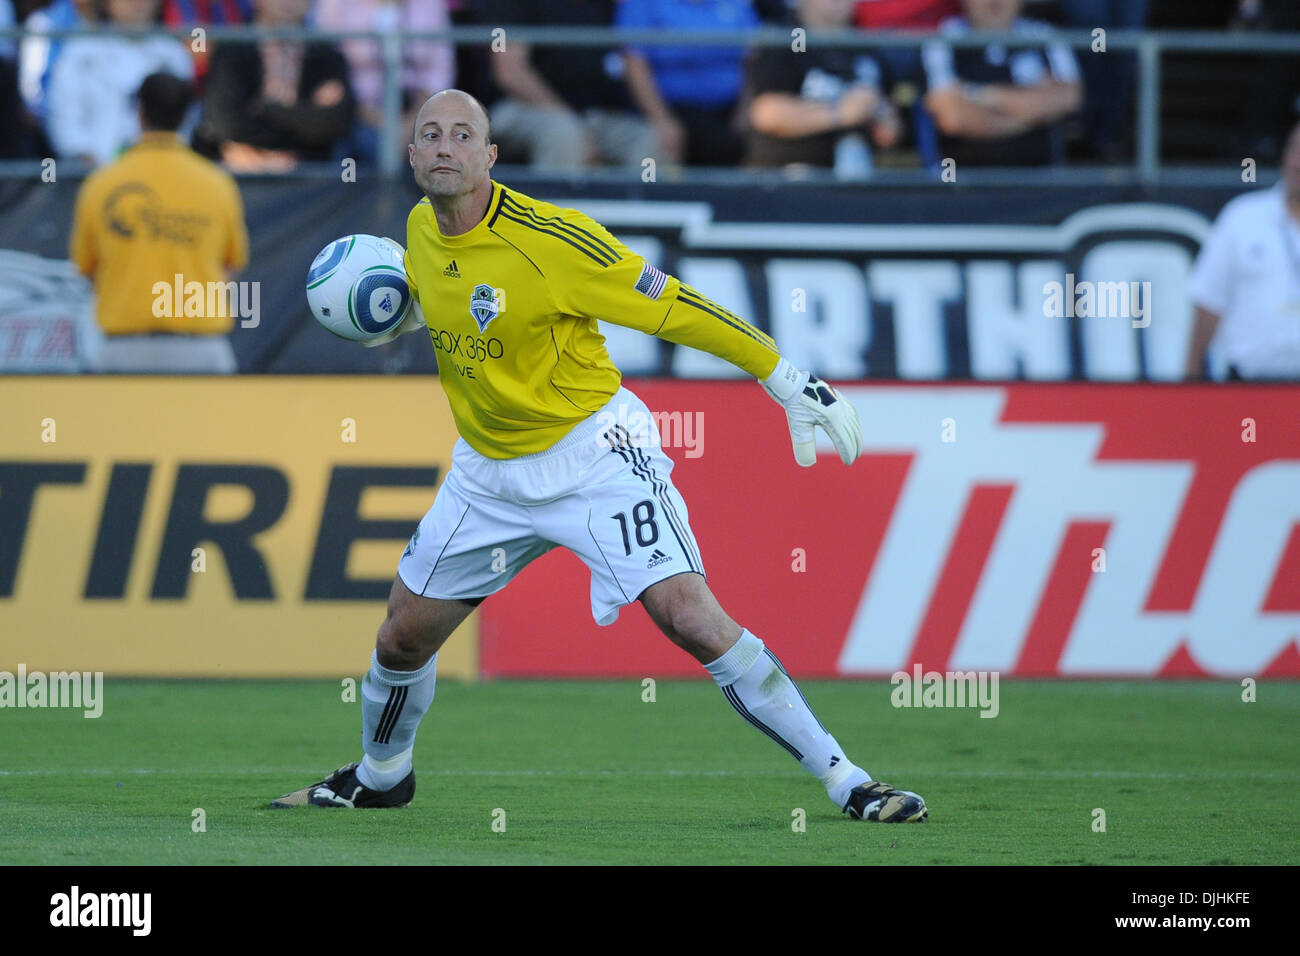 July 31, 2010 - Santa Clara, California, United States of America - 31 July 2010: Seattle Sounders GK Kasey Keller (18) distributes the ball during the MLS match between the San Jose Earthquakes and Seattle Sounders at Buck Shaw Stadium in Santa Clara, CA.  The visiting Sounders won 1-0 and picked up the second annual Heritage Cup..Mandatory Credit: Matt Cohen / Southcreek Global ( Stock Photo